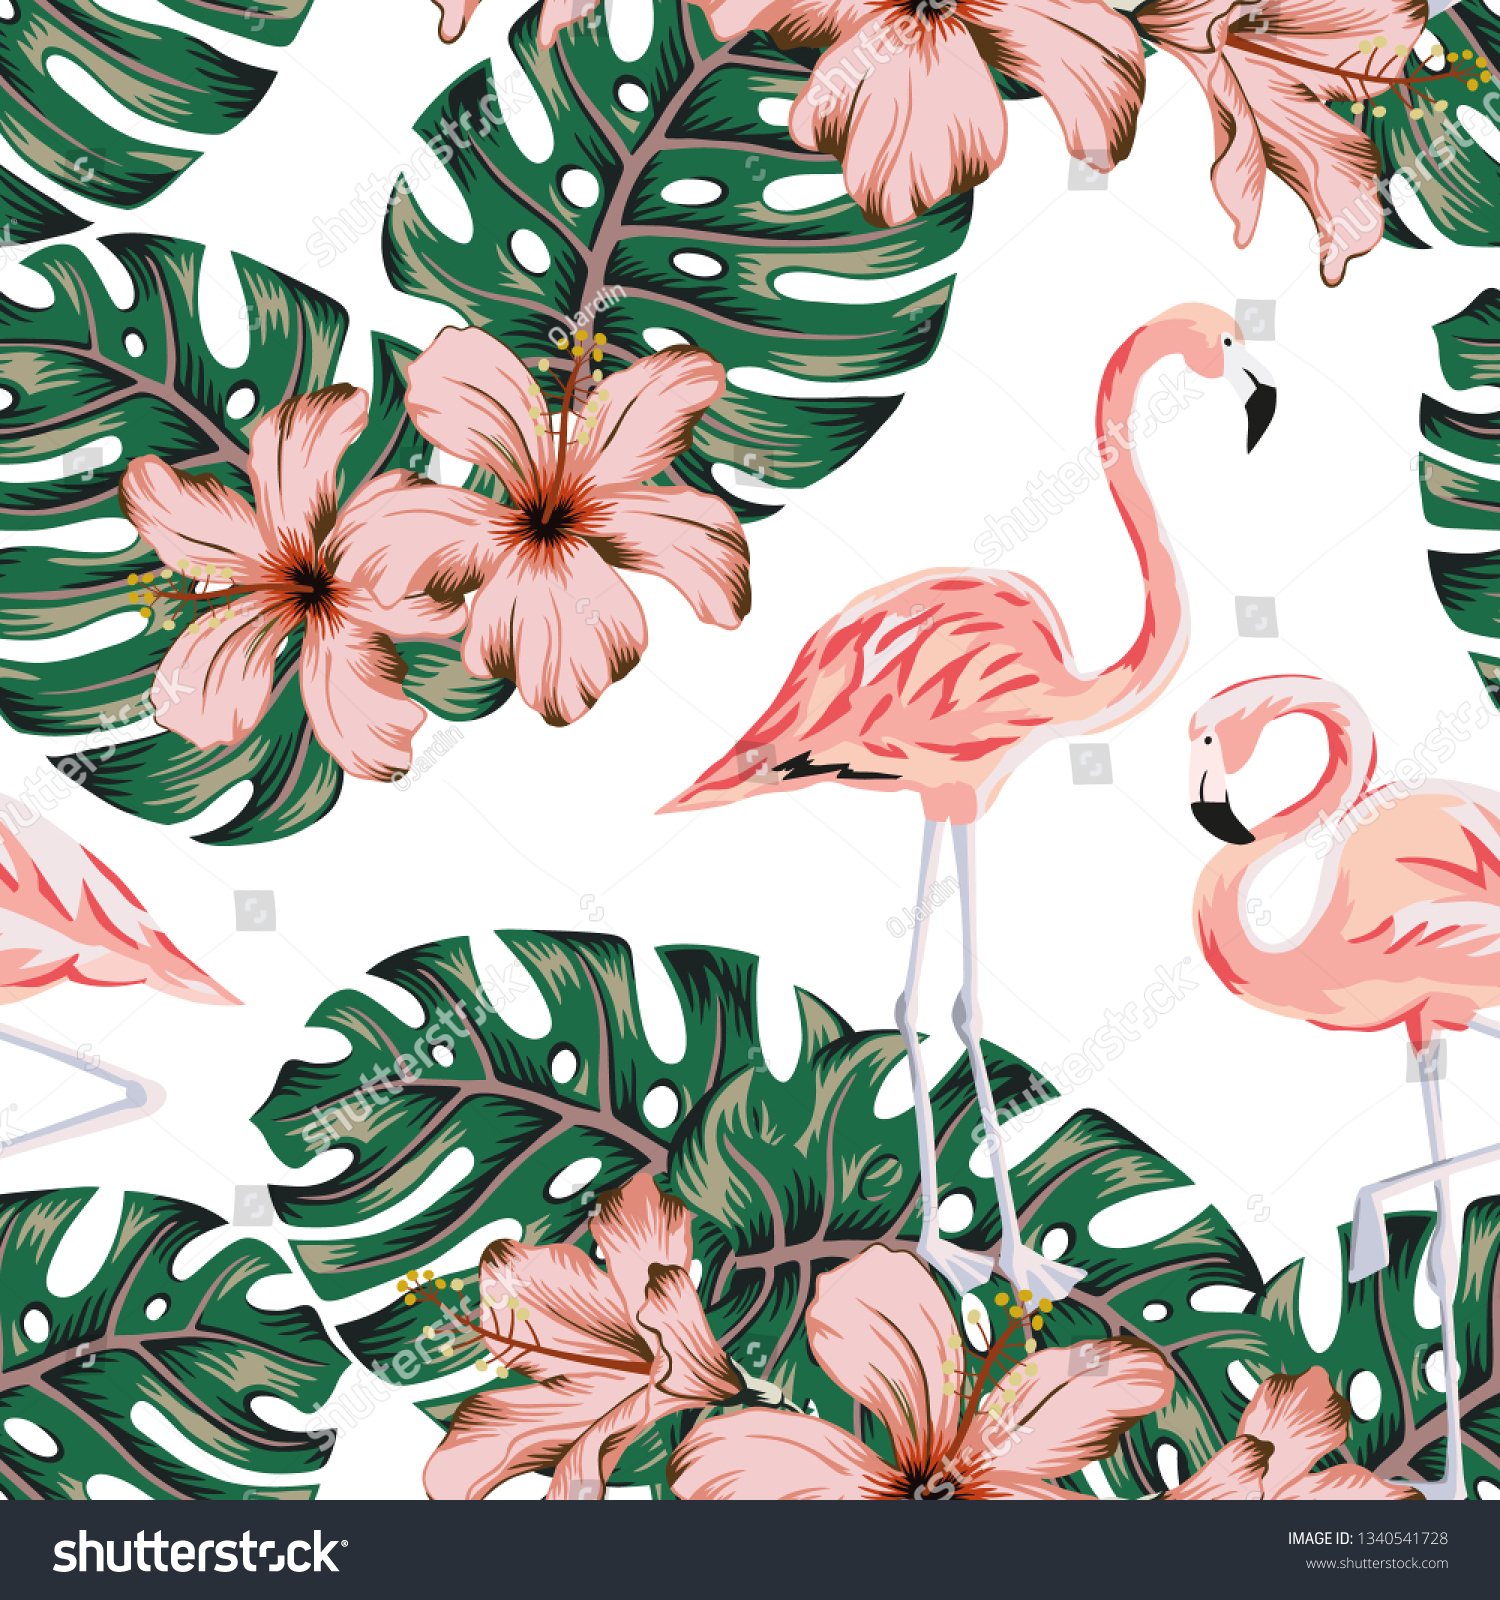 240mmX200mmX3mm Flamingo Mouse pad Flamingos with Tropical Leaves and Flowers Pattern Rectangle Non-Slip Rubber Mousepad 9.5 X 7.9 Inch 